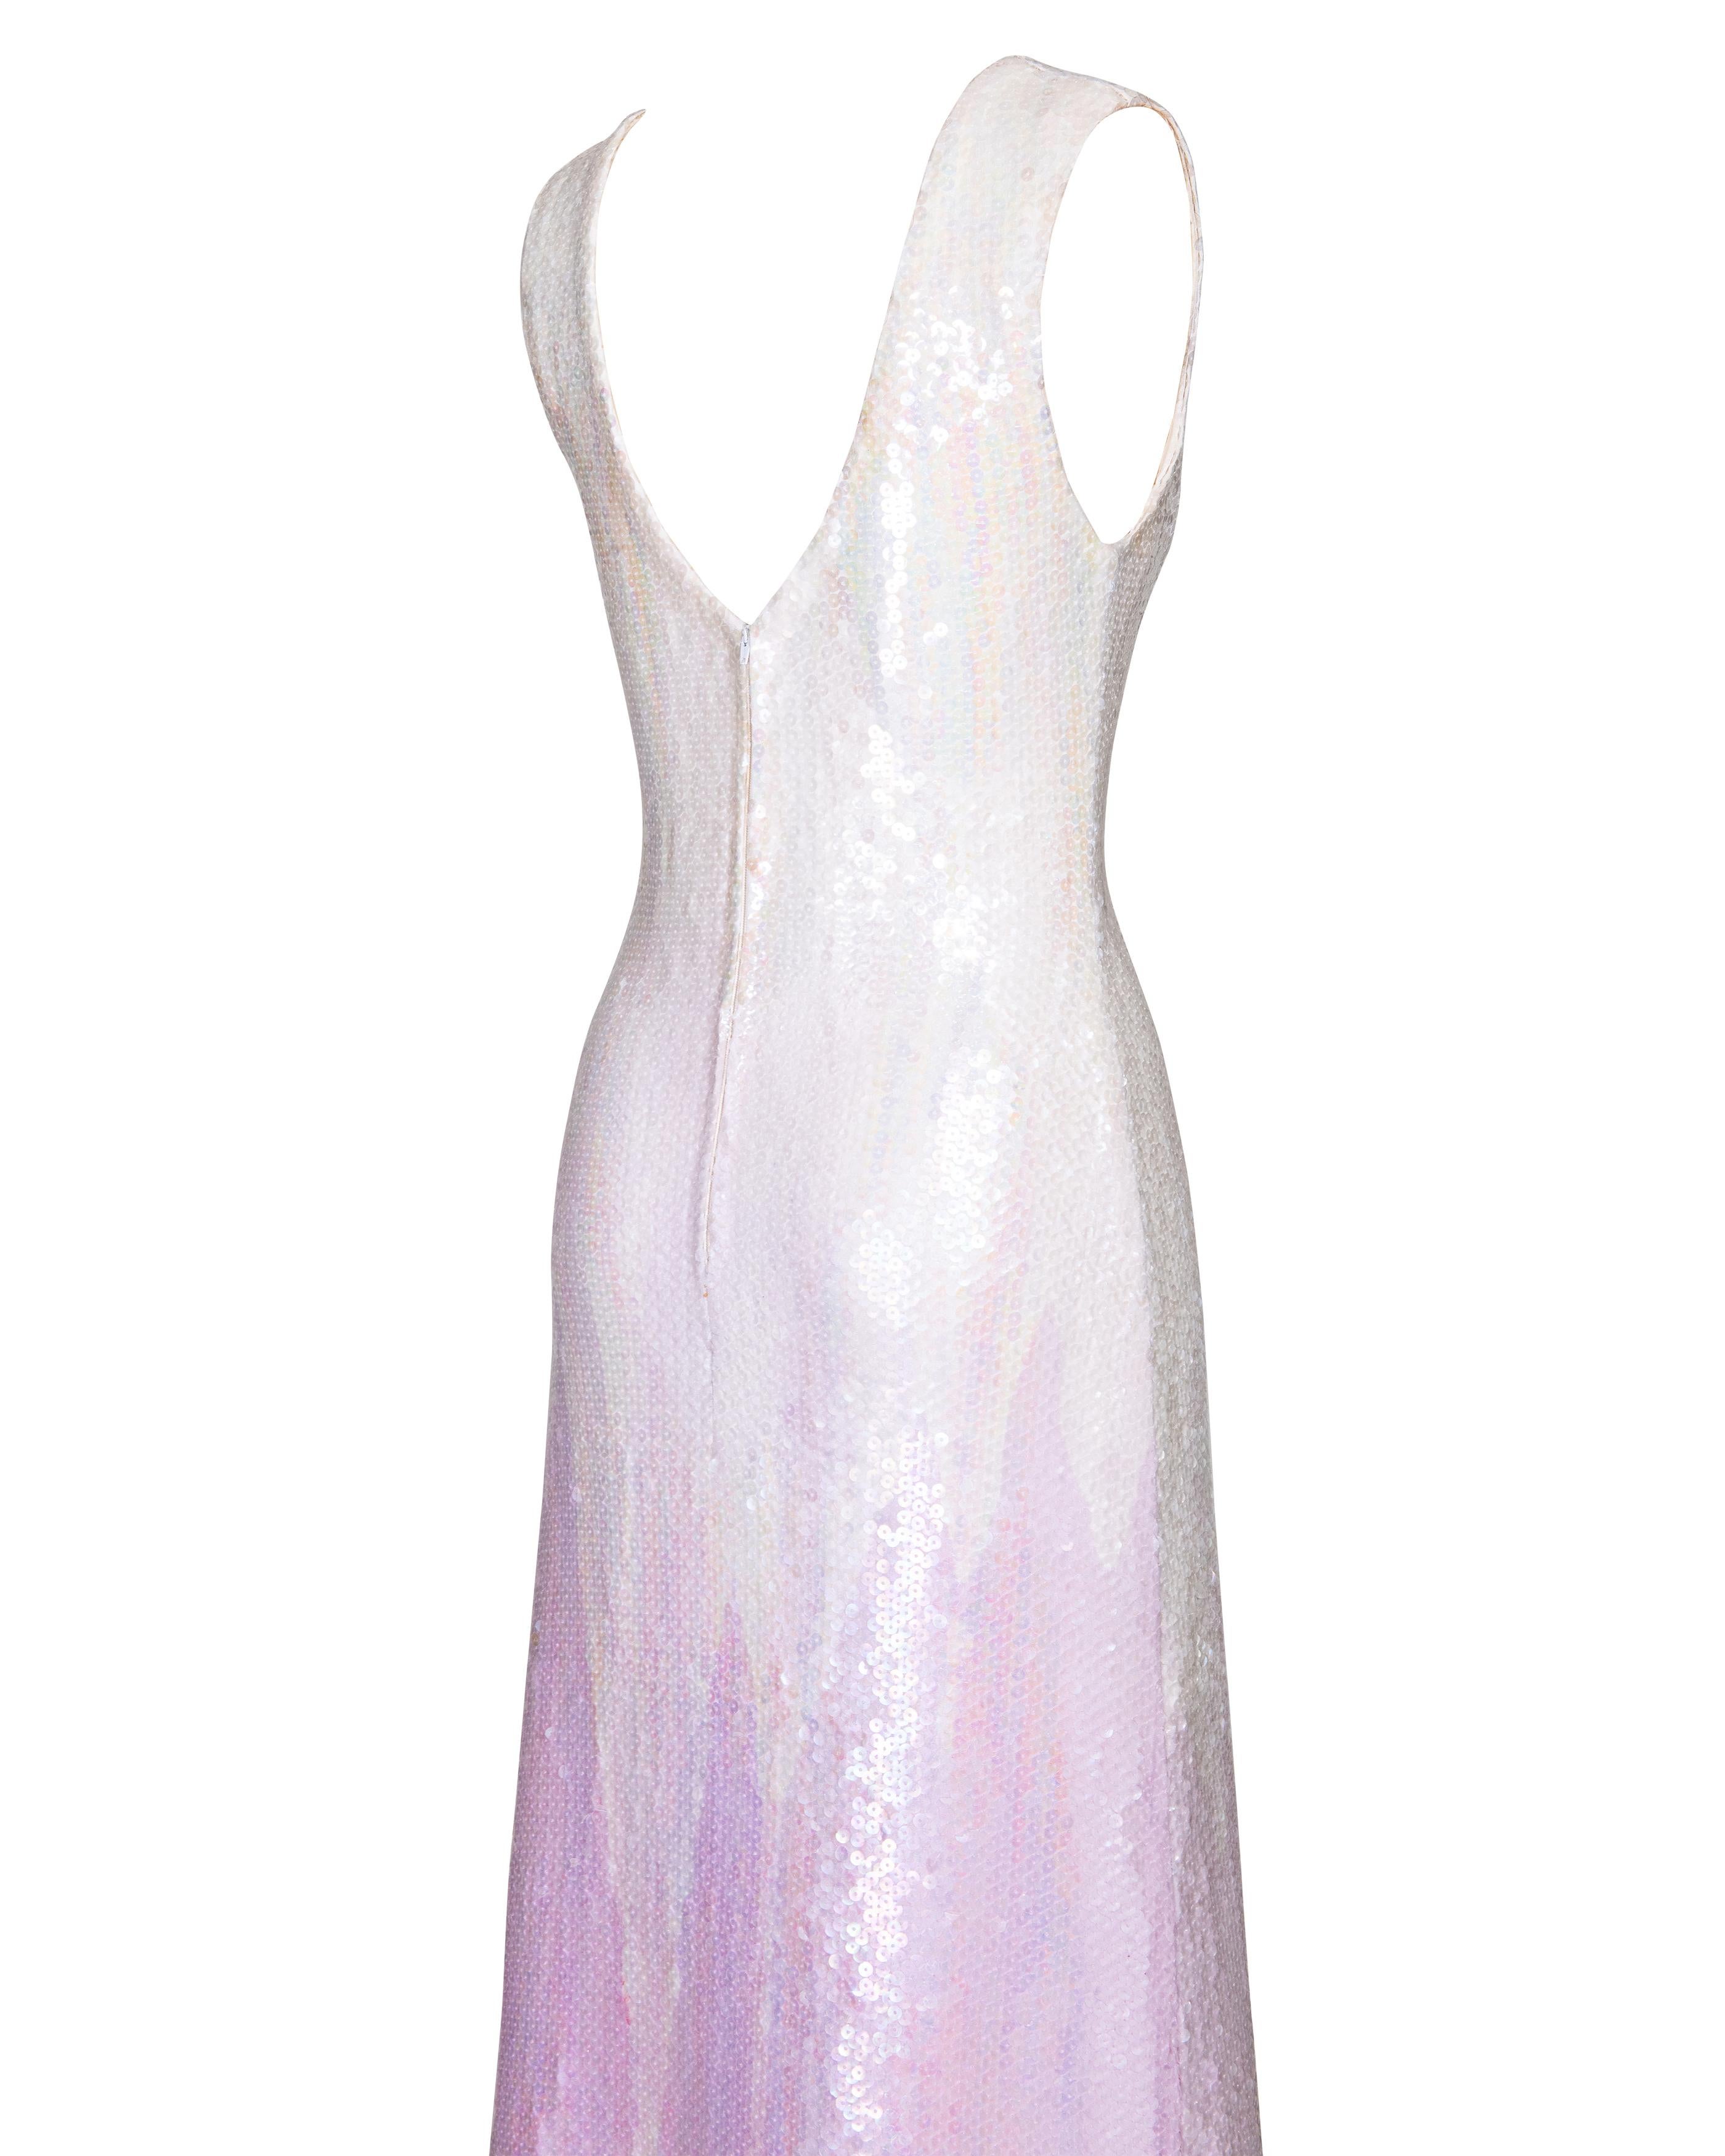 A/W 1973 Halston Sleeveless Geometric Point Sequin Gradient Gown For Sale 6